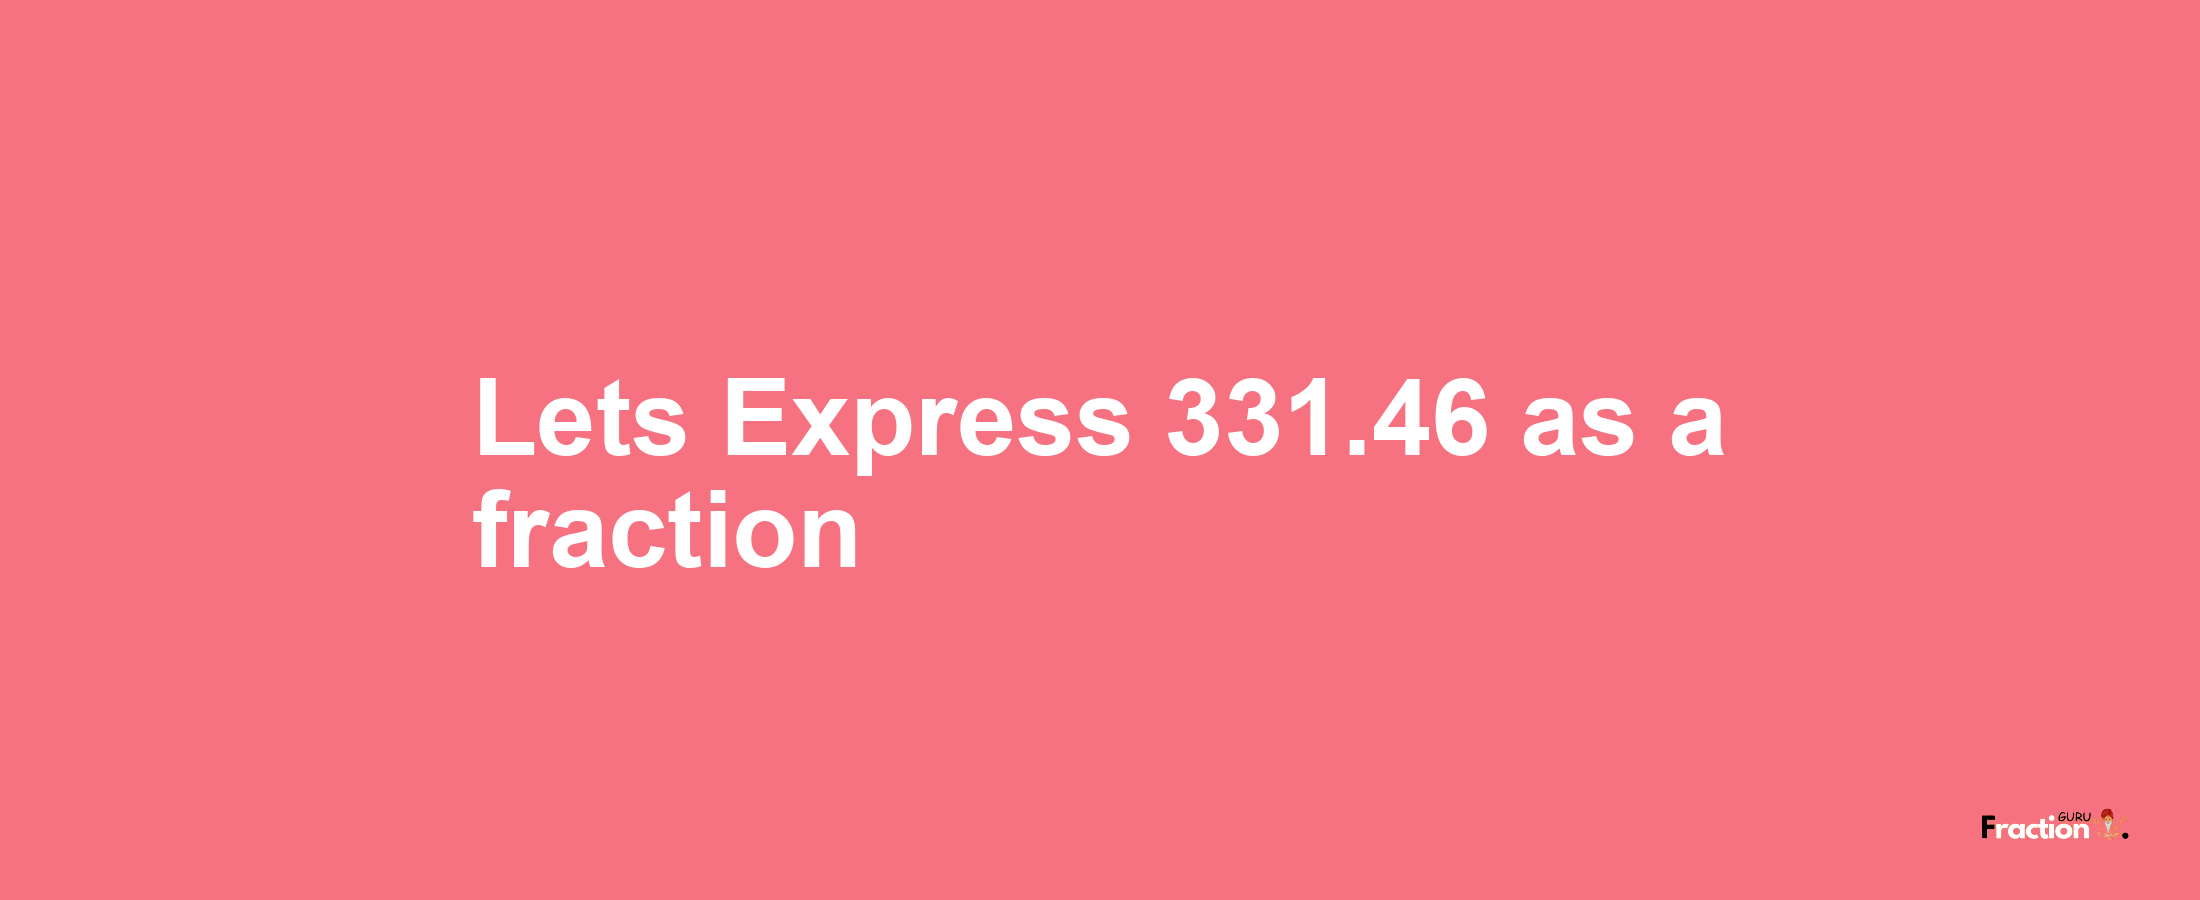 Lets Express 331.46 as afraction